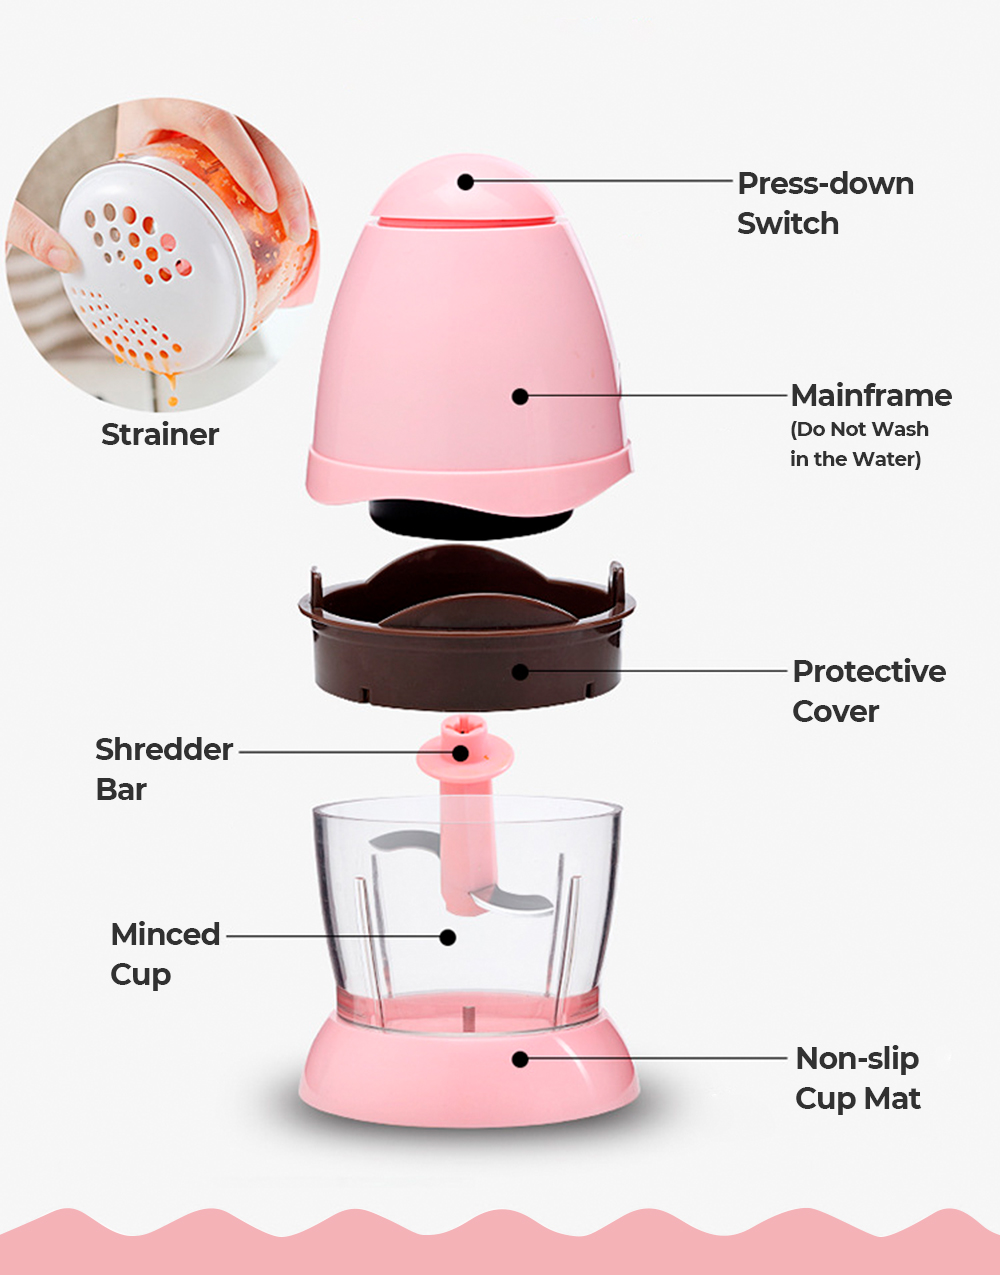 Multifunctional Baby Cook Mixer Household Electric Mini Meat Grinder Processor